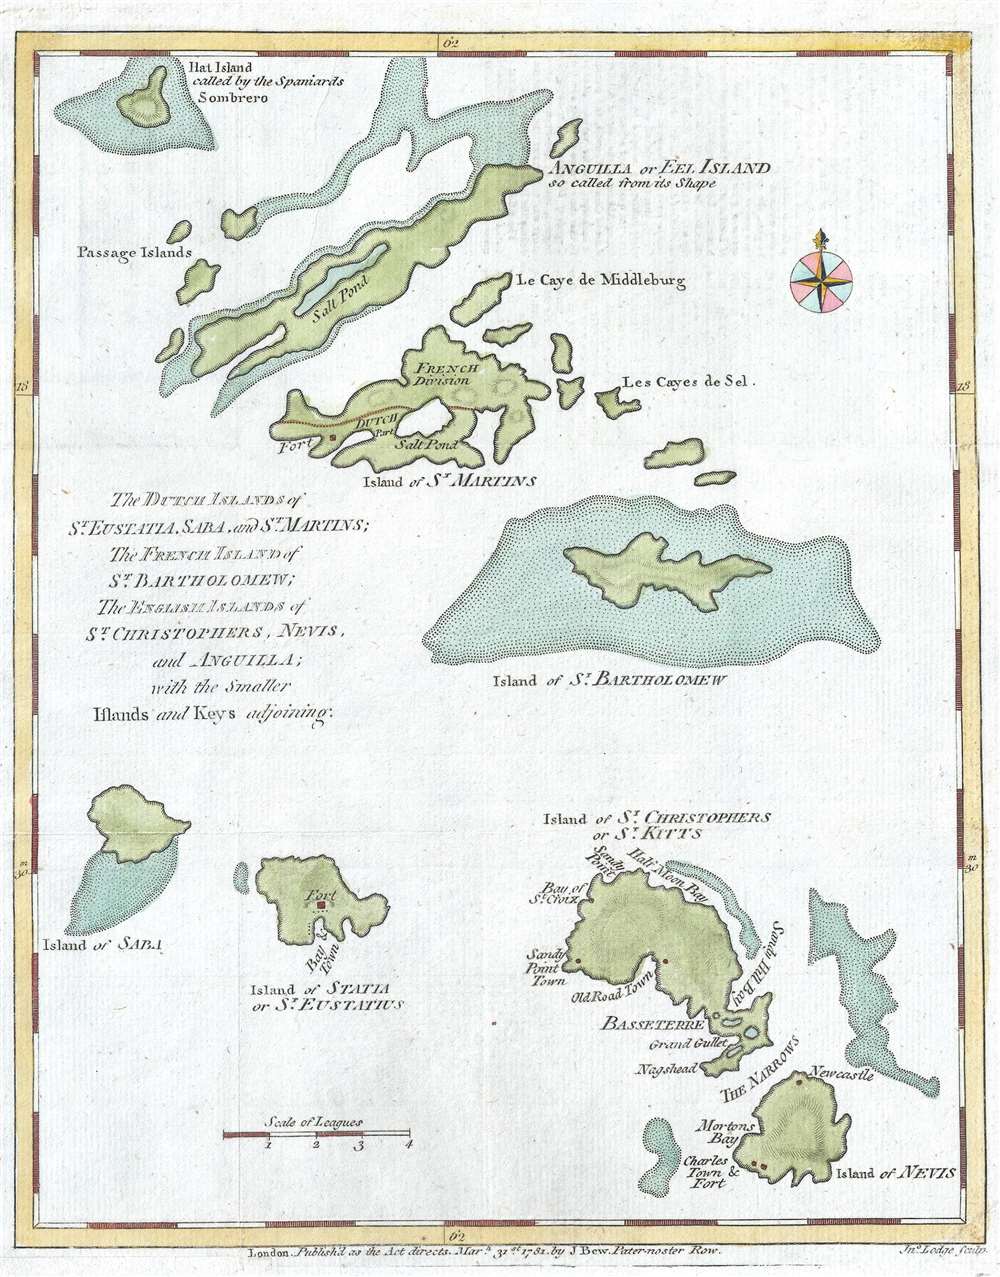 The Dutch Islands of St. Eustatia, Saba, and St. Martins; The French Island of St. Bartholomew; The English Islands of St. Christophers, Nevis, and Anguilla; with the smaller Islands and Keys adjoining. - Main View